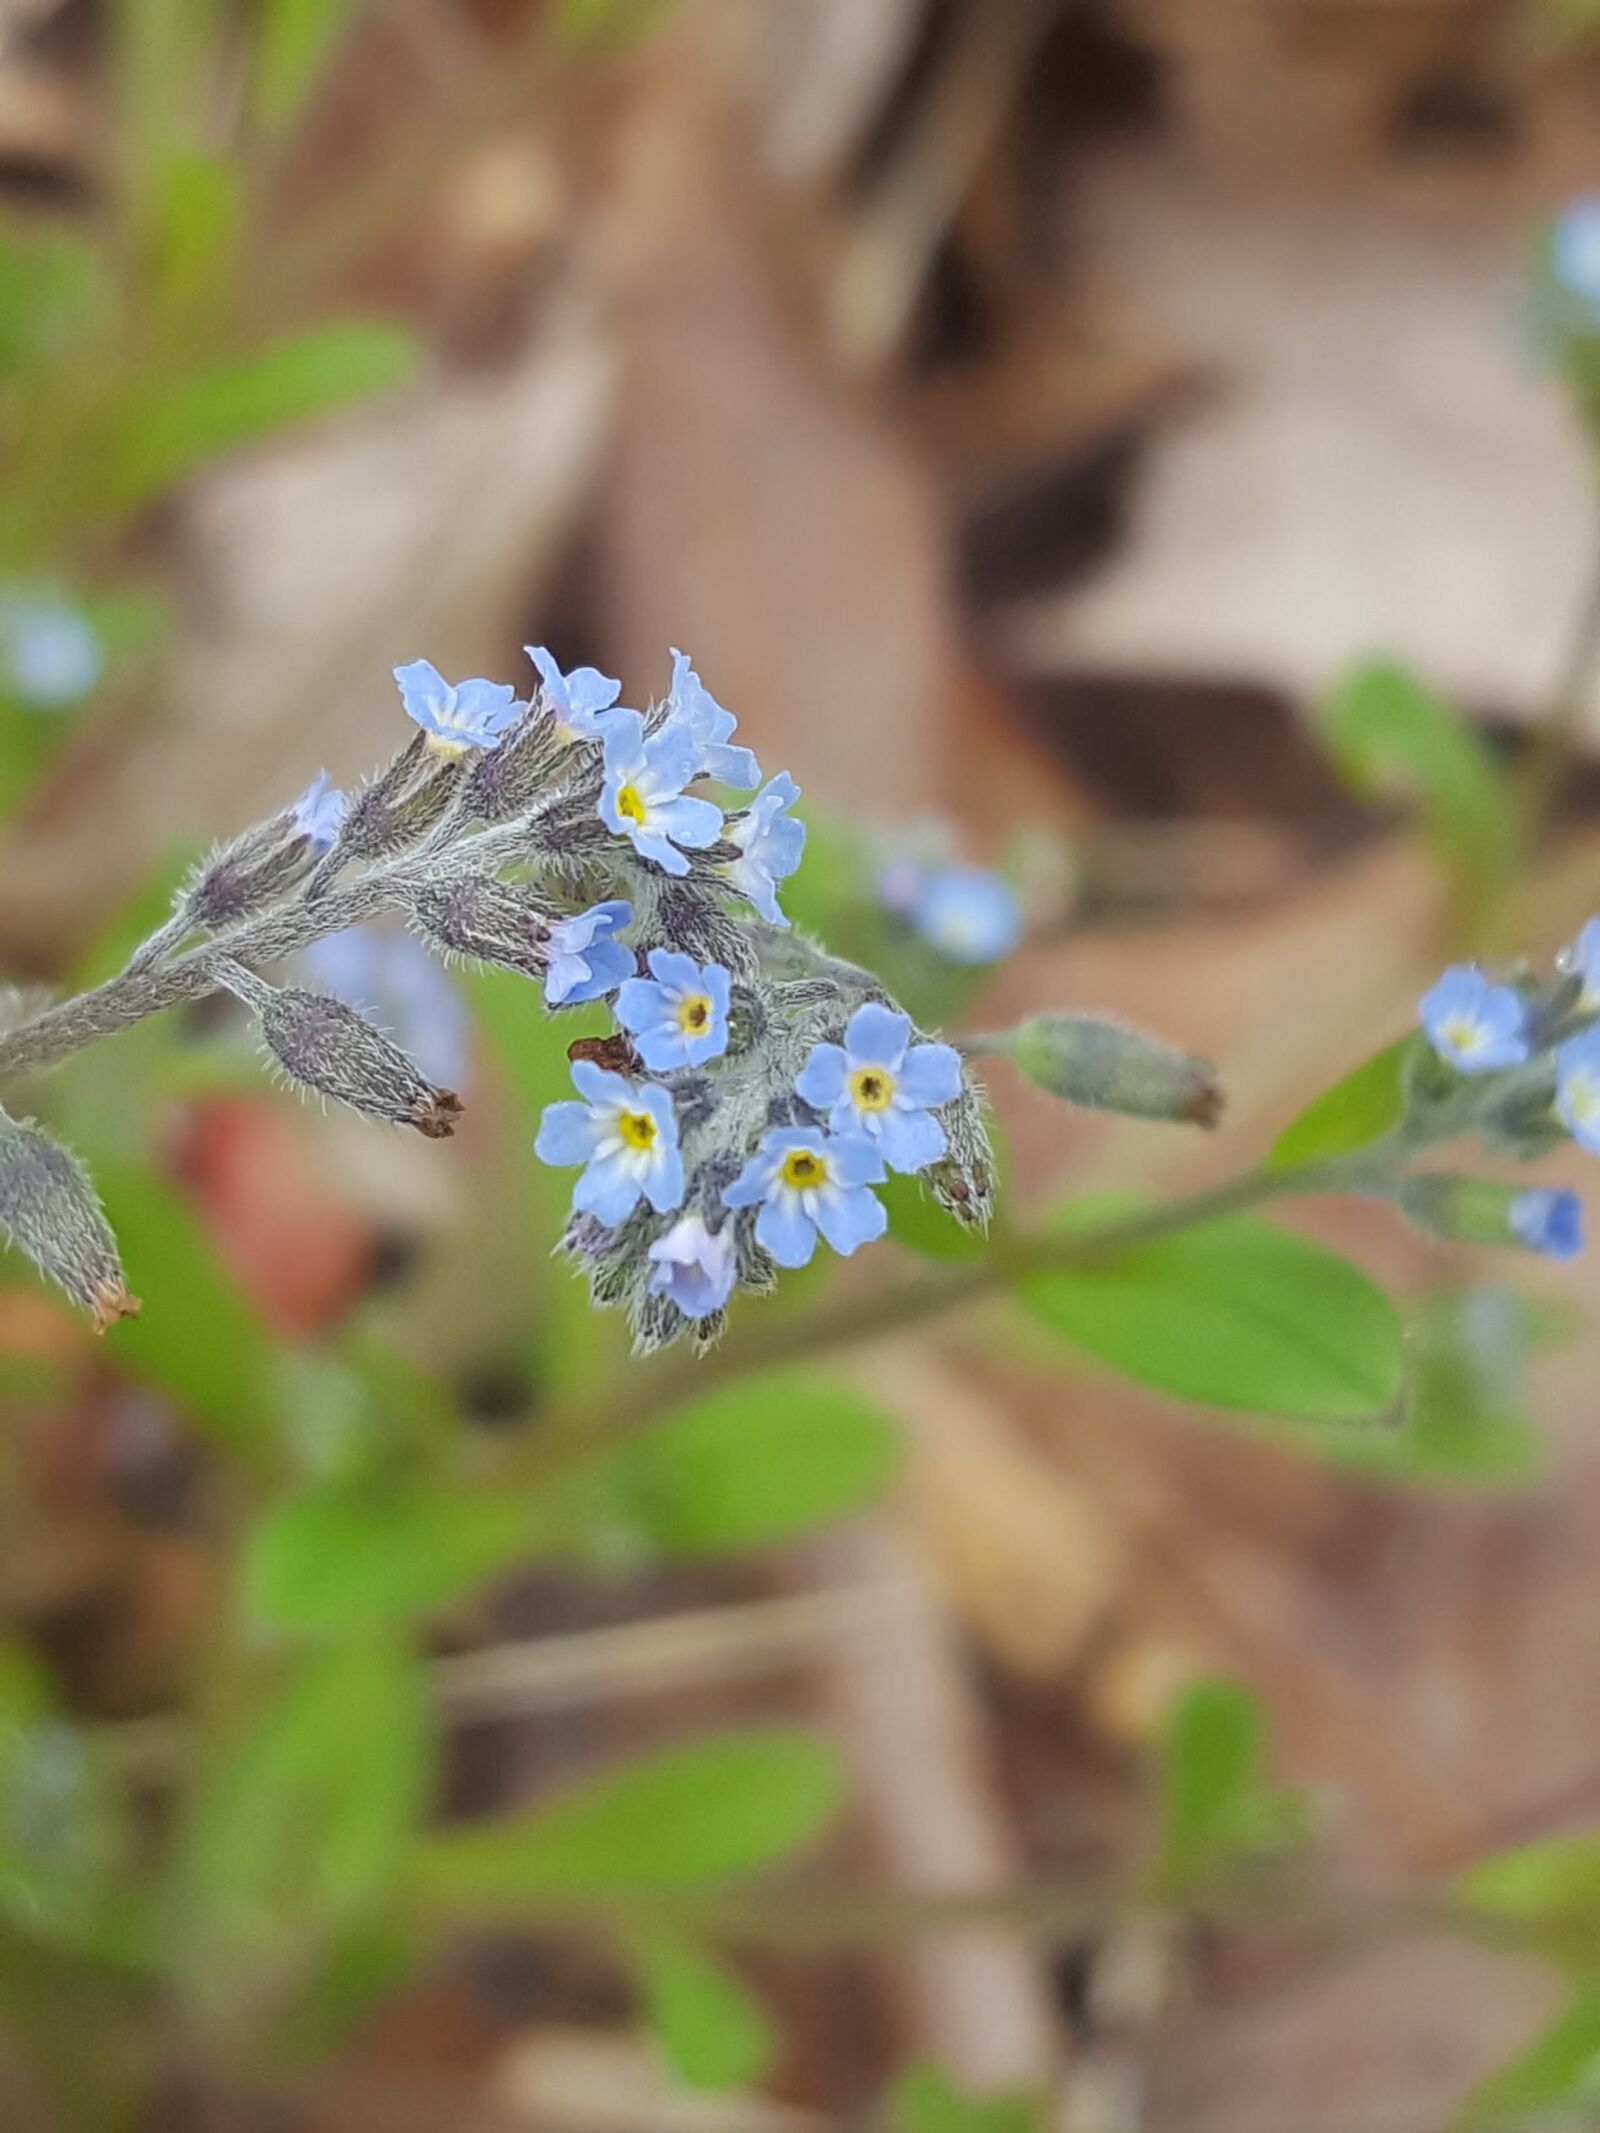 Samsung Galaxy S6 sample photo. Blue, bloom, nature photography